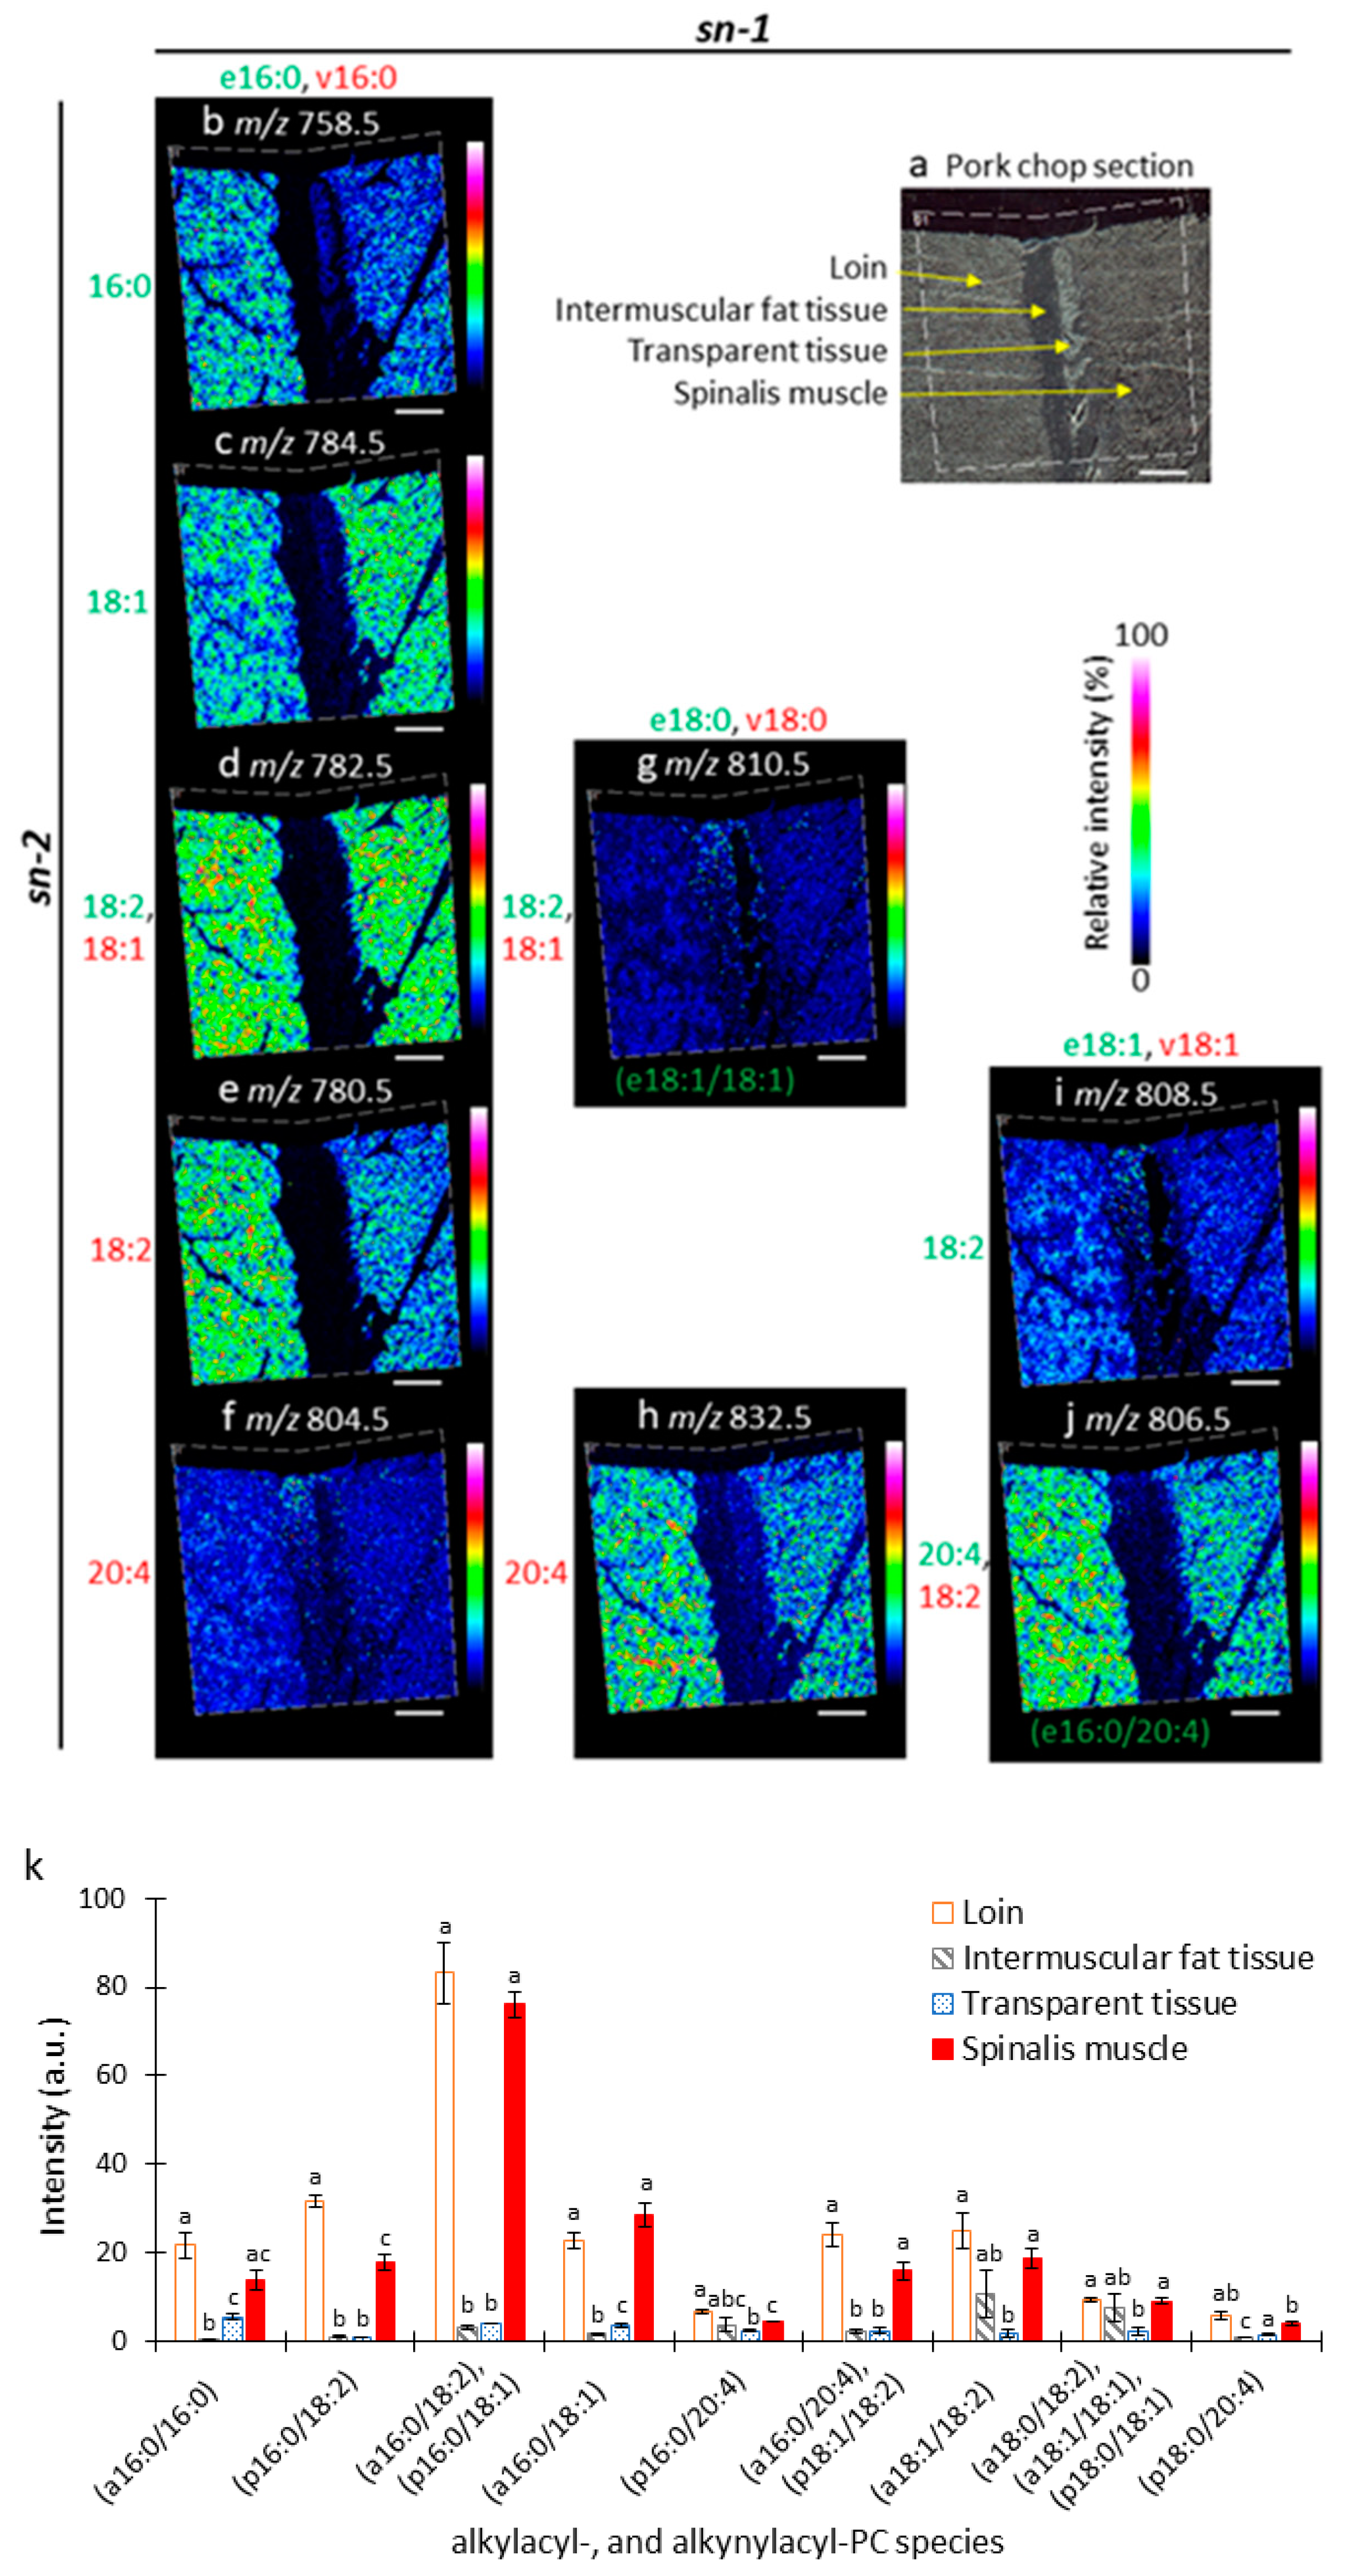 Foods Free Full Text Unique Distribution Of Diacyl Alkylacyl And Alkenylacyl Phosphatidylcholine Species Visualized In Pork Chop Tissues By Matrix Assisted Laser Desorption Ionization Mass Spectrometry Imaging Html